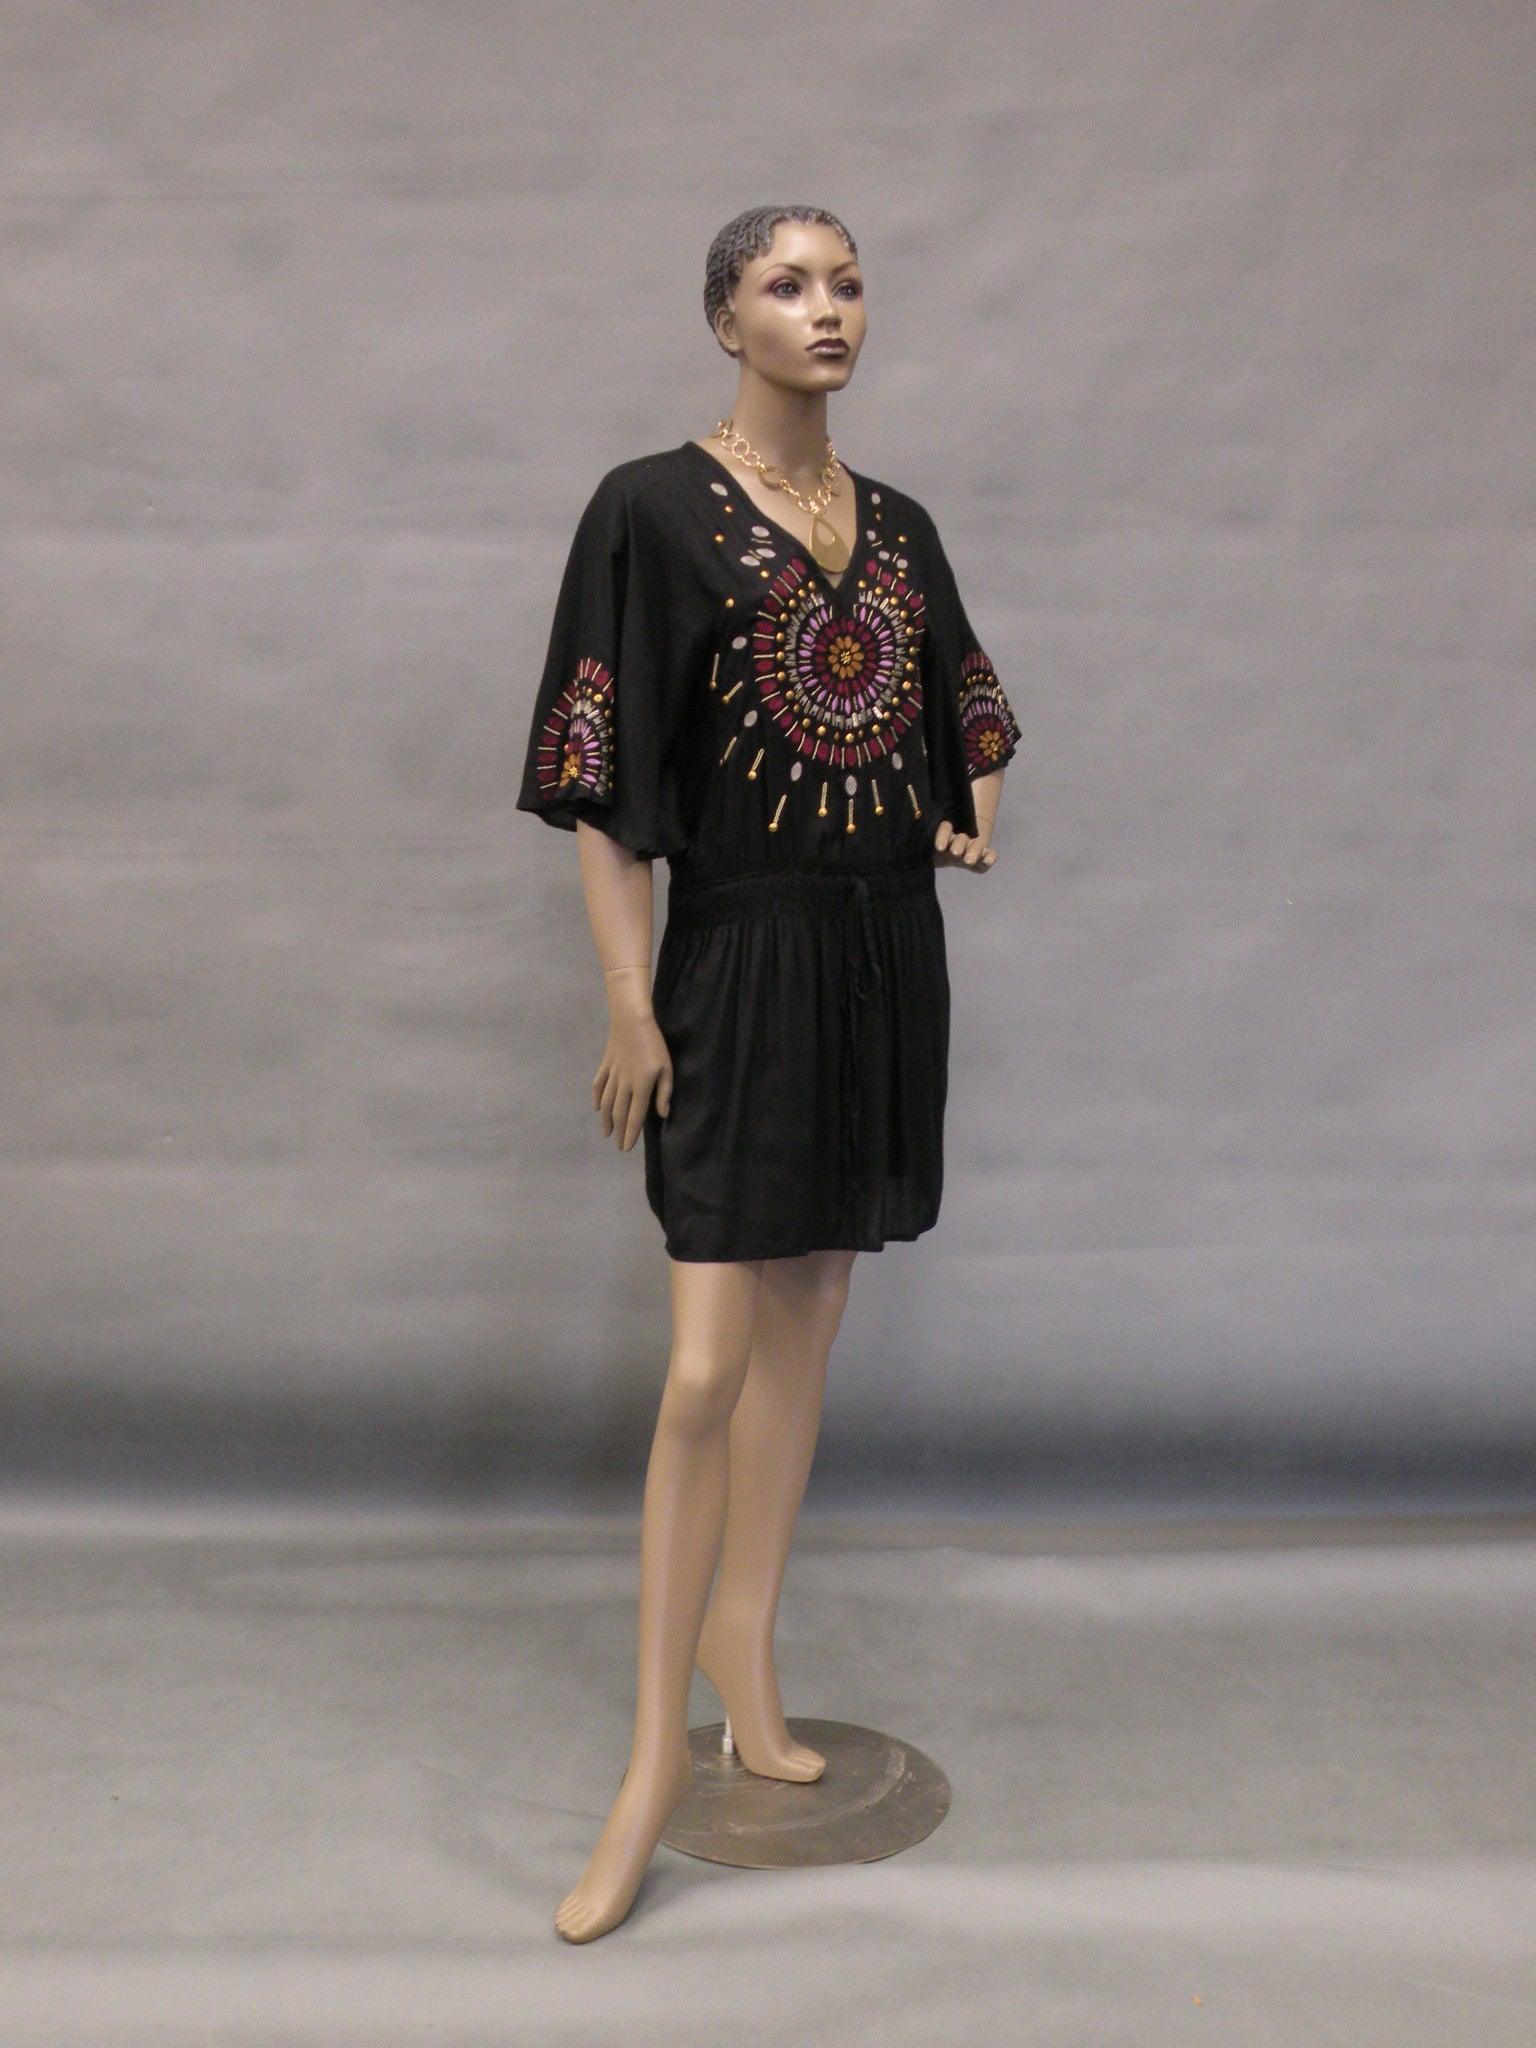 New Arrival Big Size Female Africa Mannequin Fashionable For